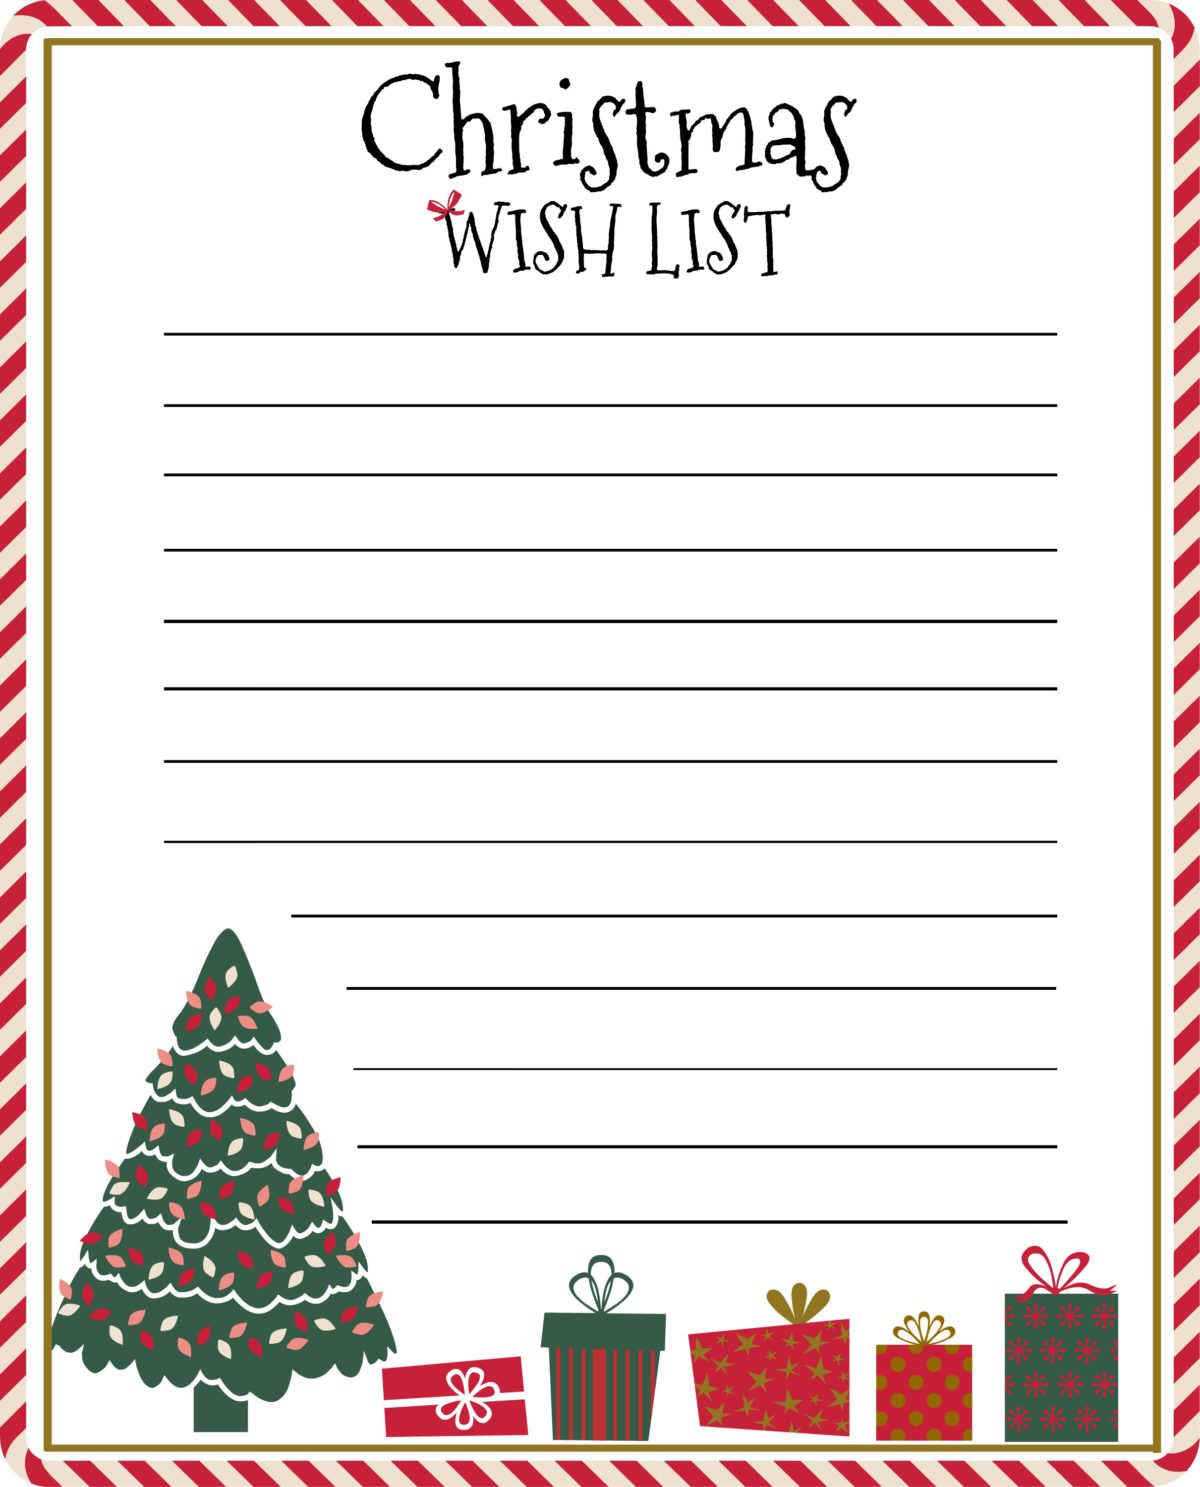 Free wish list printable for easy Cyber Monday shopping - My Mommy Style